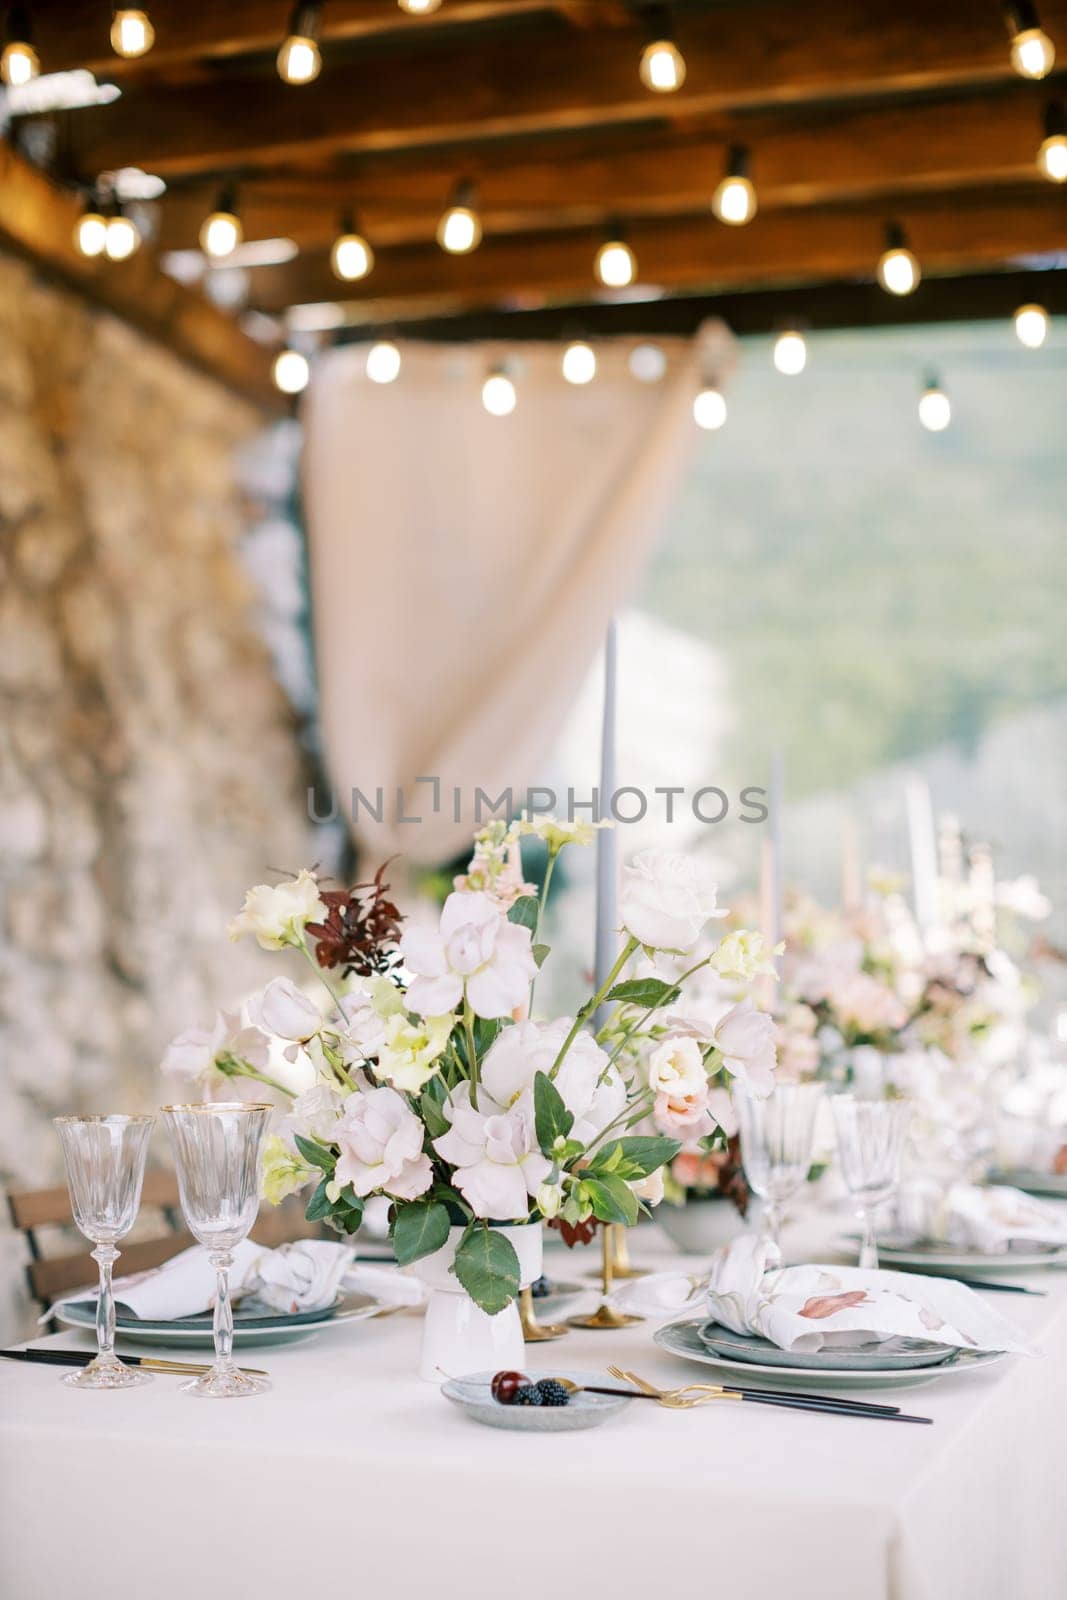 Bouquet of flowers stands on a festive table on a terrace with glowing garlands. High quality photo